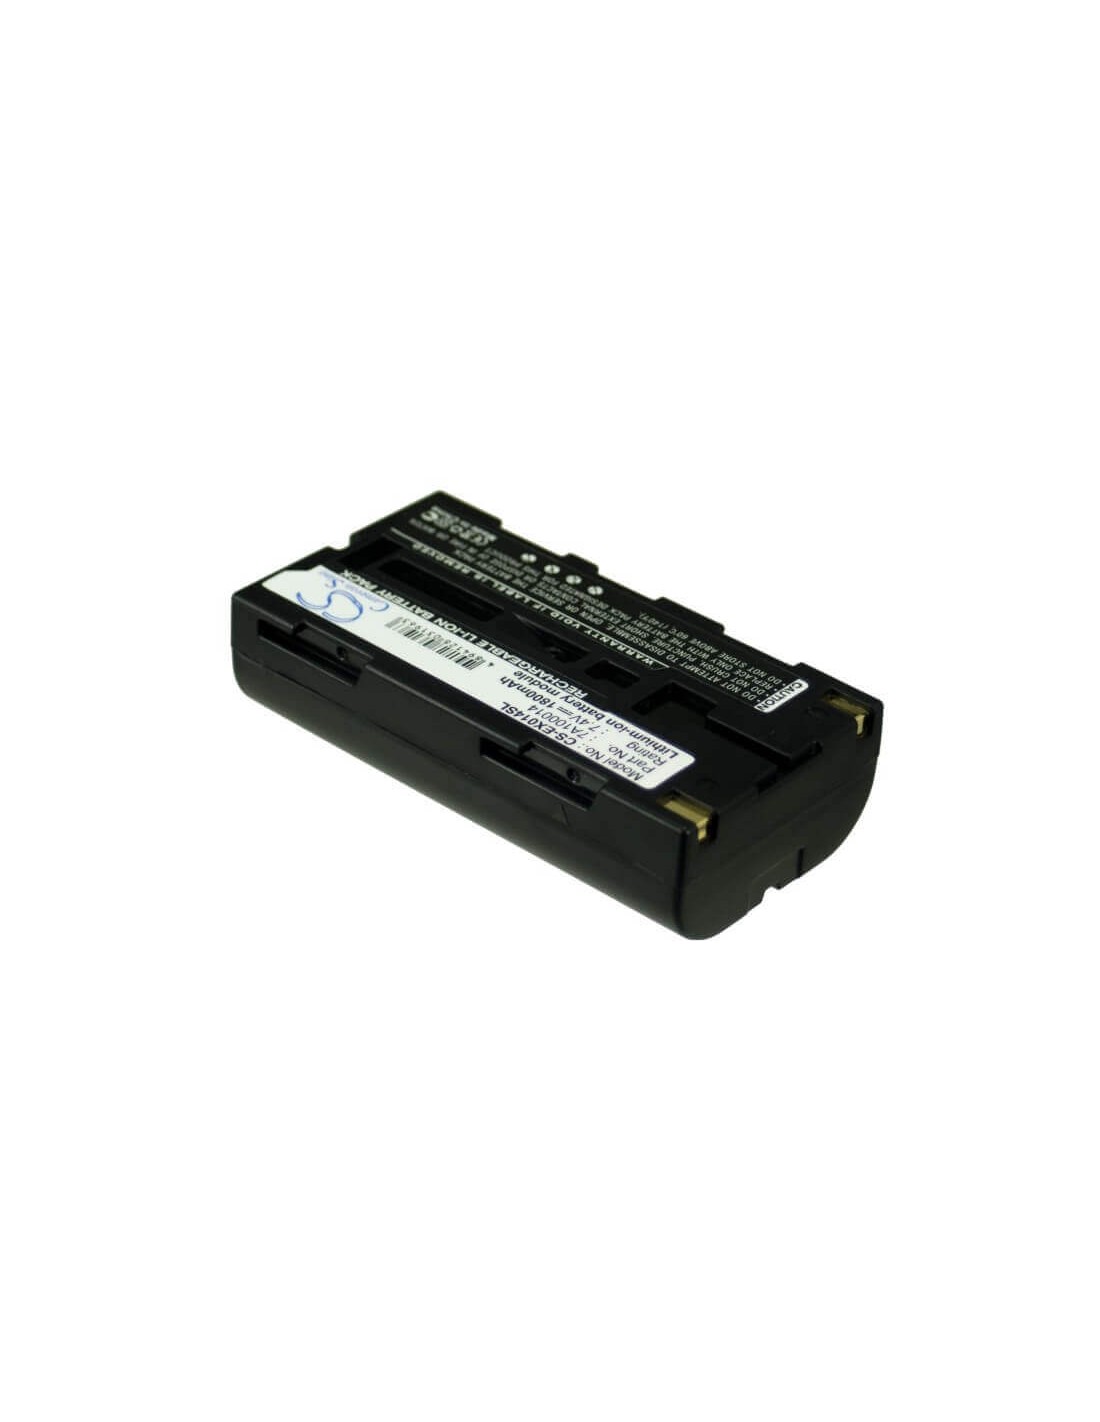 Battery for Extech Dual Port, Andes 3, Apex 2 7.4V, 1800mAh - 13.32Wh